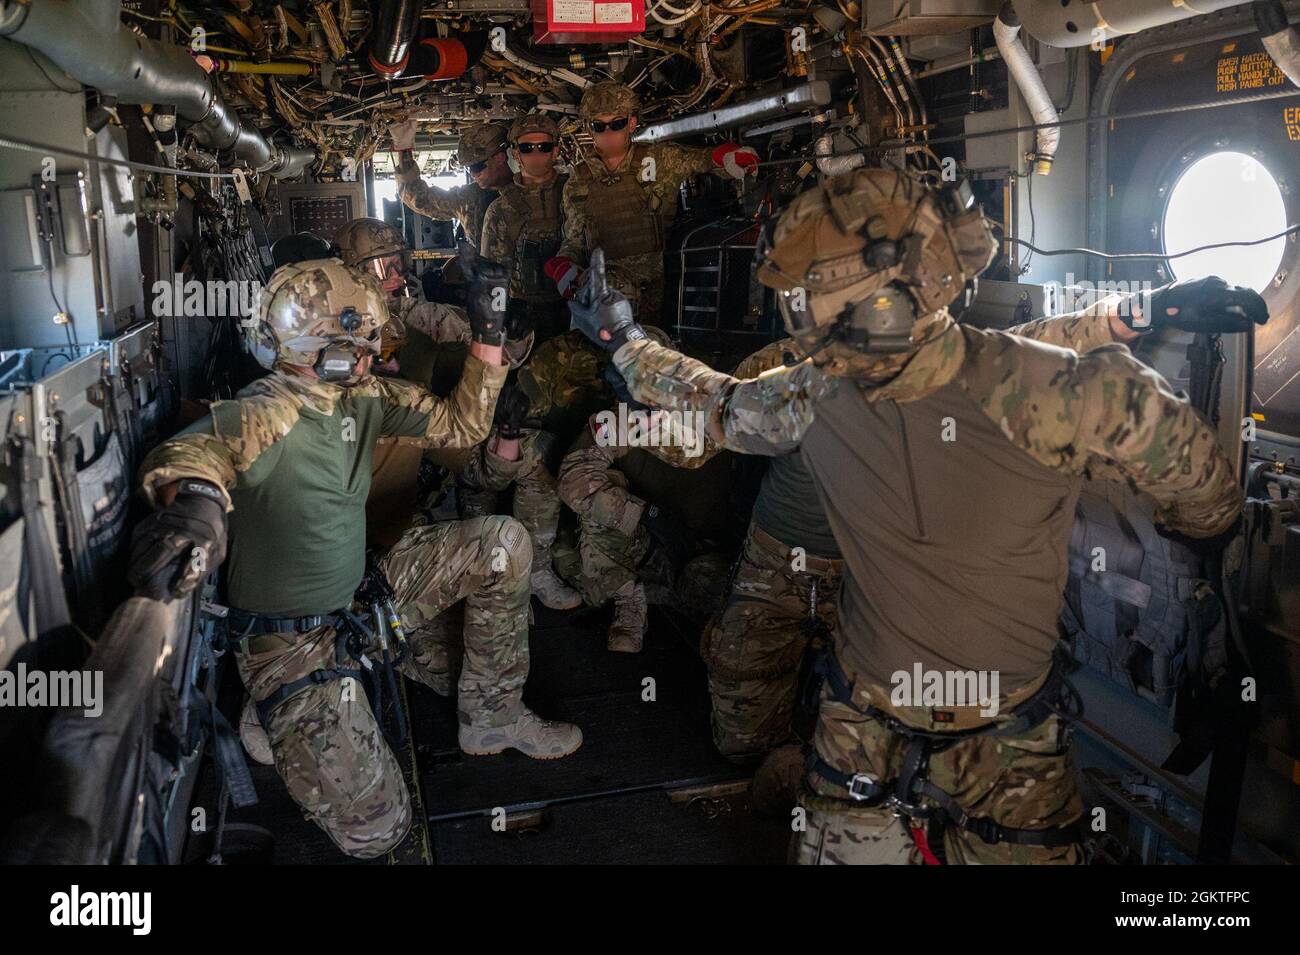 Polish Special Operators signal in preparation to repel from a U.S. Air Force CV-22B Osprey during a fast-rope insertion and extraction training during exercise Sea Breeze 21 at Ochakiv, Ukraine, June 29, 2021. This is the 21st iteration of the exercise which is an annual Ukraine and U.S. co-hosted multinational maritime exercise held in the Black Sea region and is designed to enhance interoperability of participating nations, strengthening maritime security in support of stability within the region. Stock Photo